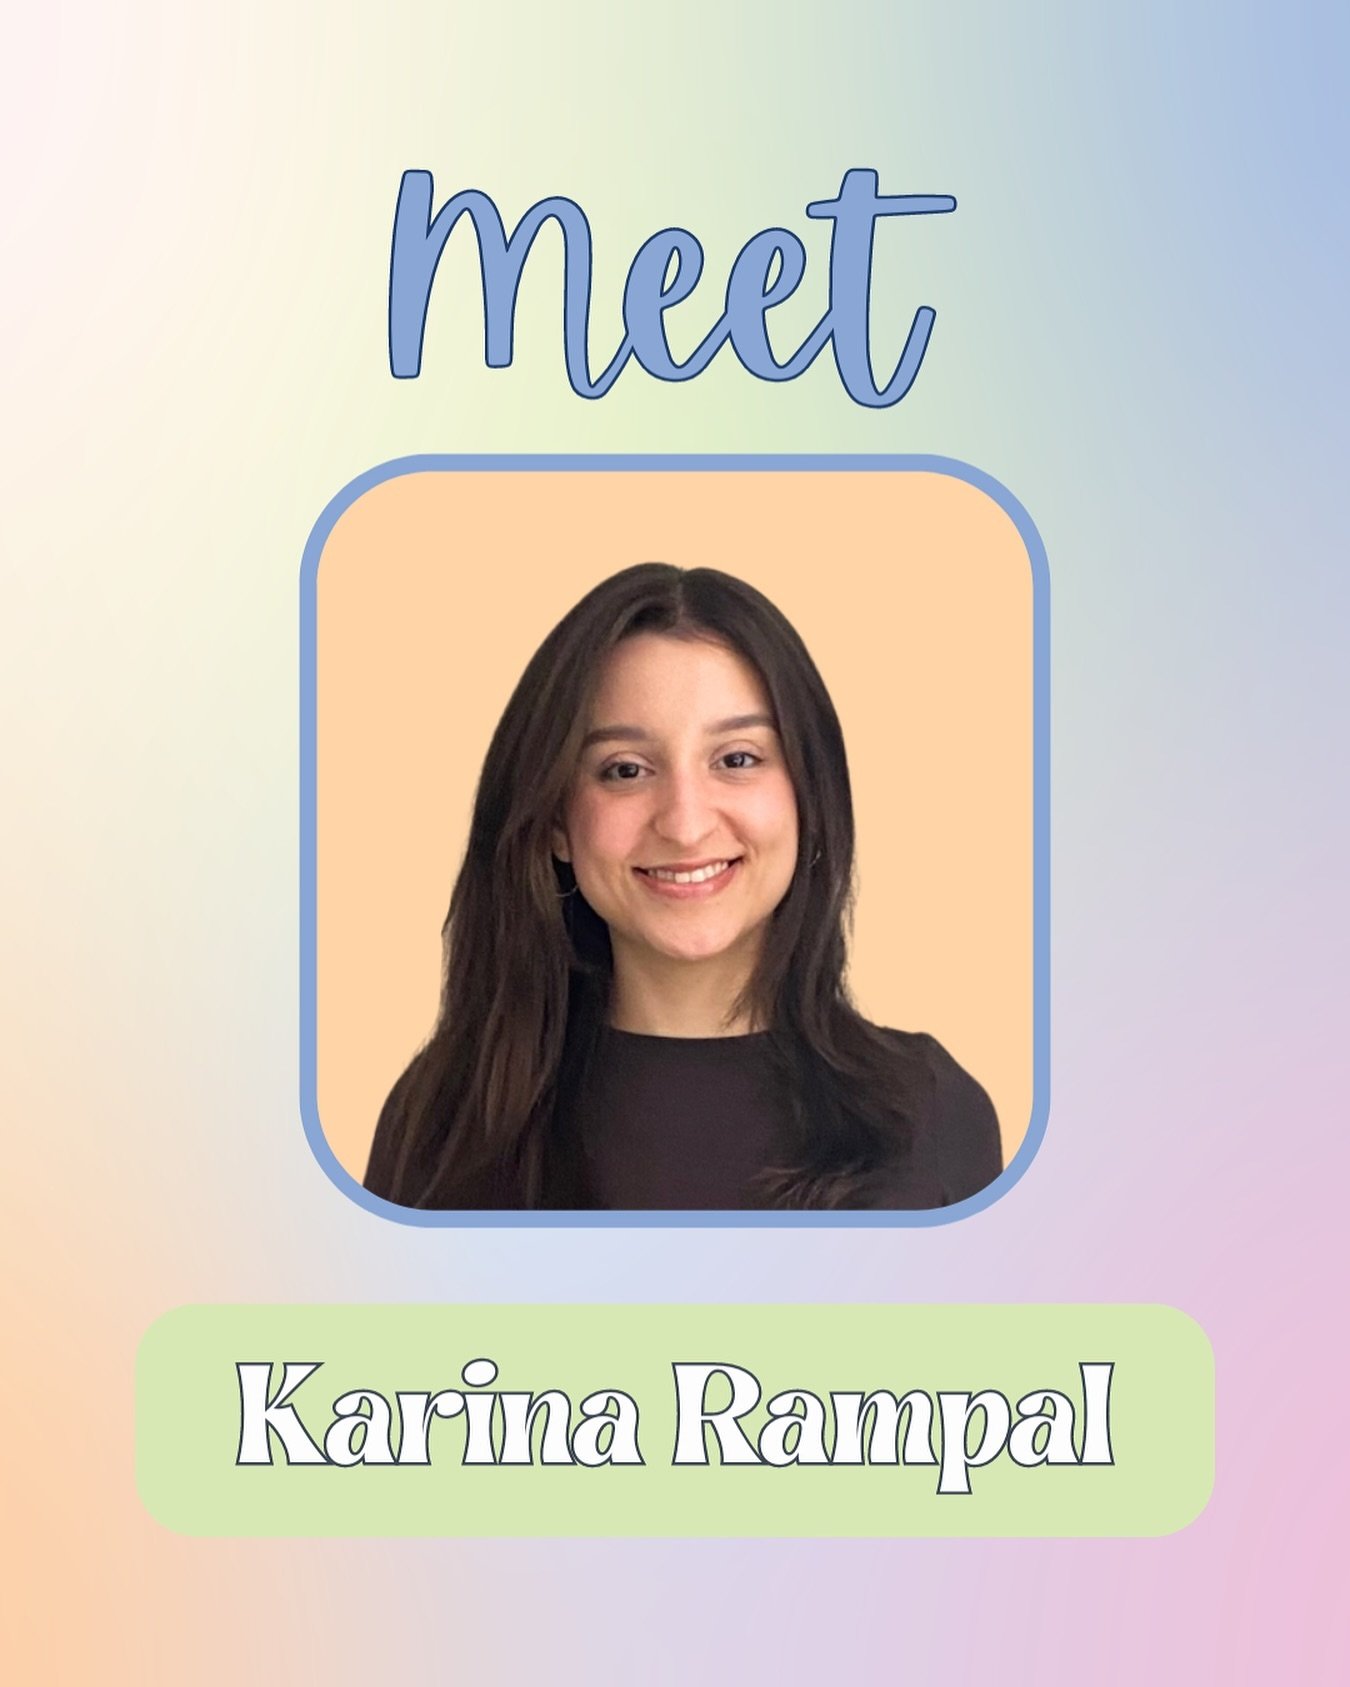 Meet our Registered Clinical Counsellor, Karina! ✨

She works with:
- Adults
- Families
- Couples
- Youth
- Children

Specializing in:
- Complex Trauma, Sexual Trauma, Vicarious Trauma Relational &amp; Developmental Trauma, Childhood Abuse, - Complex